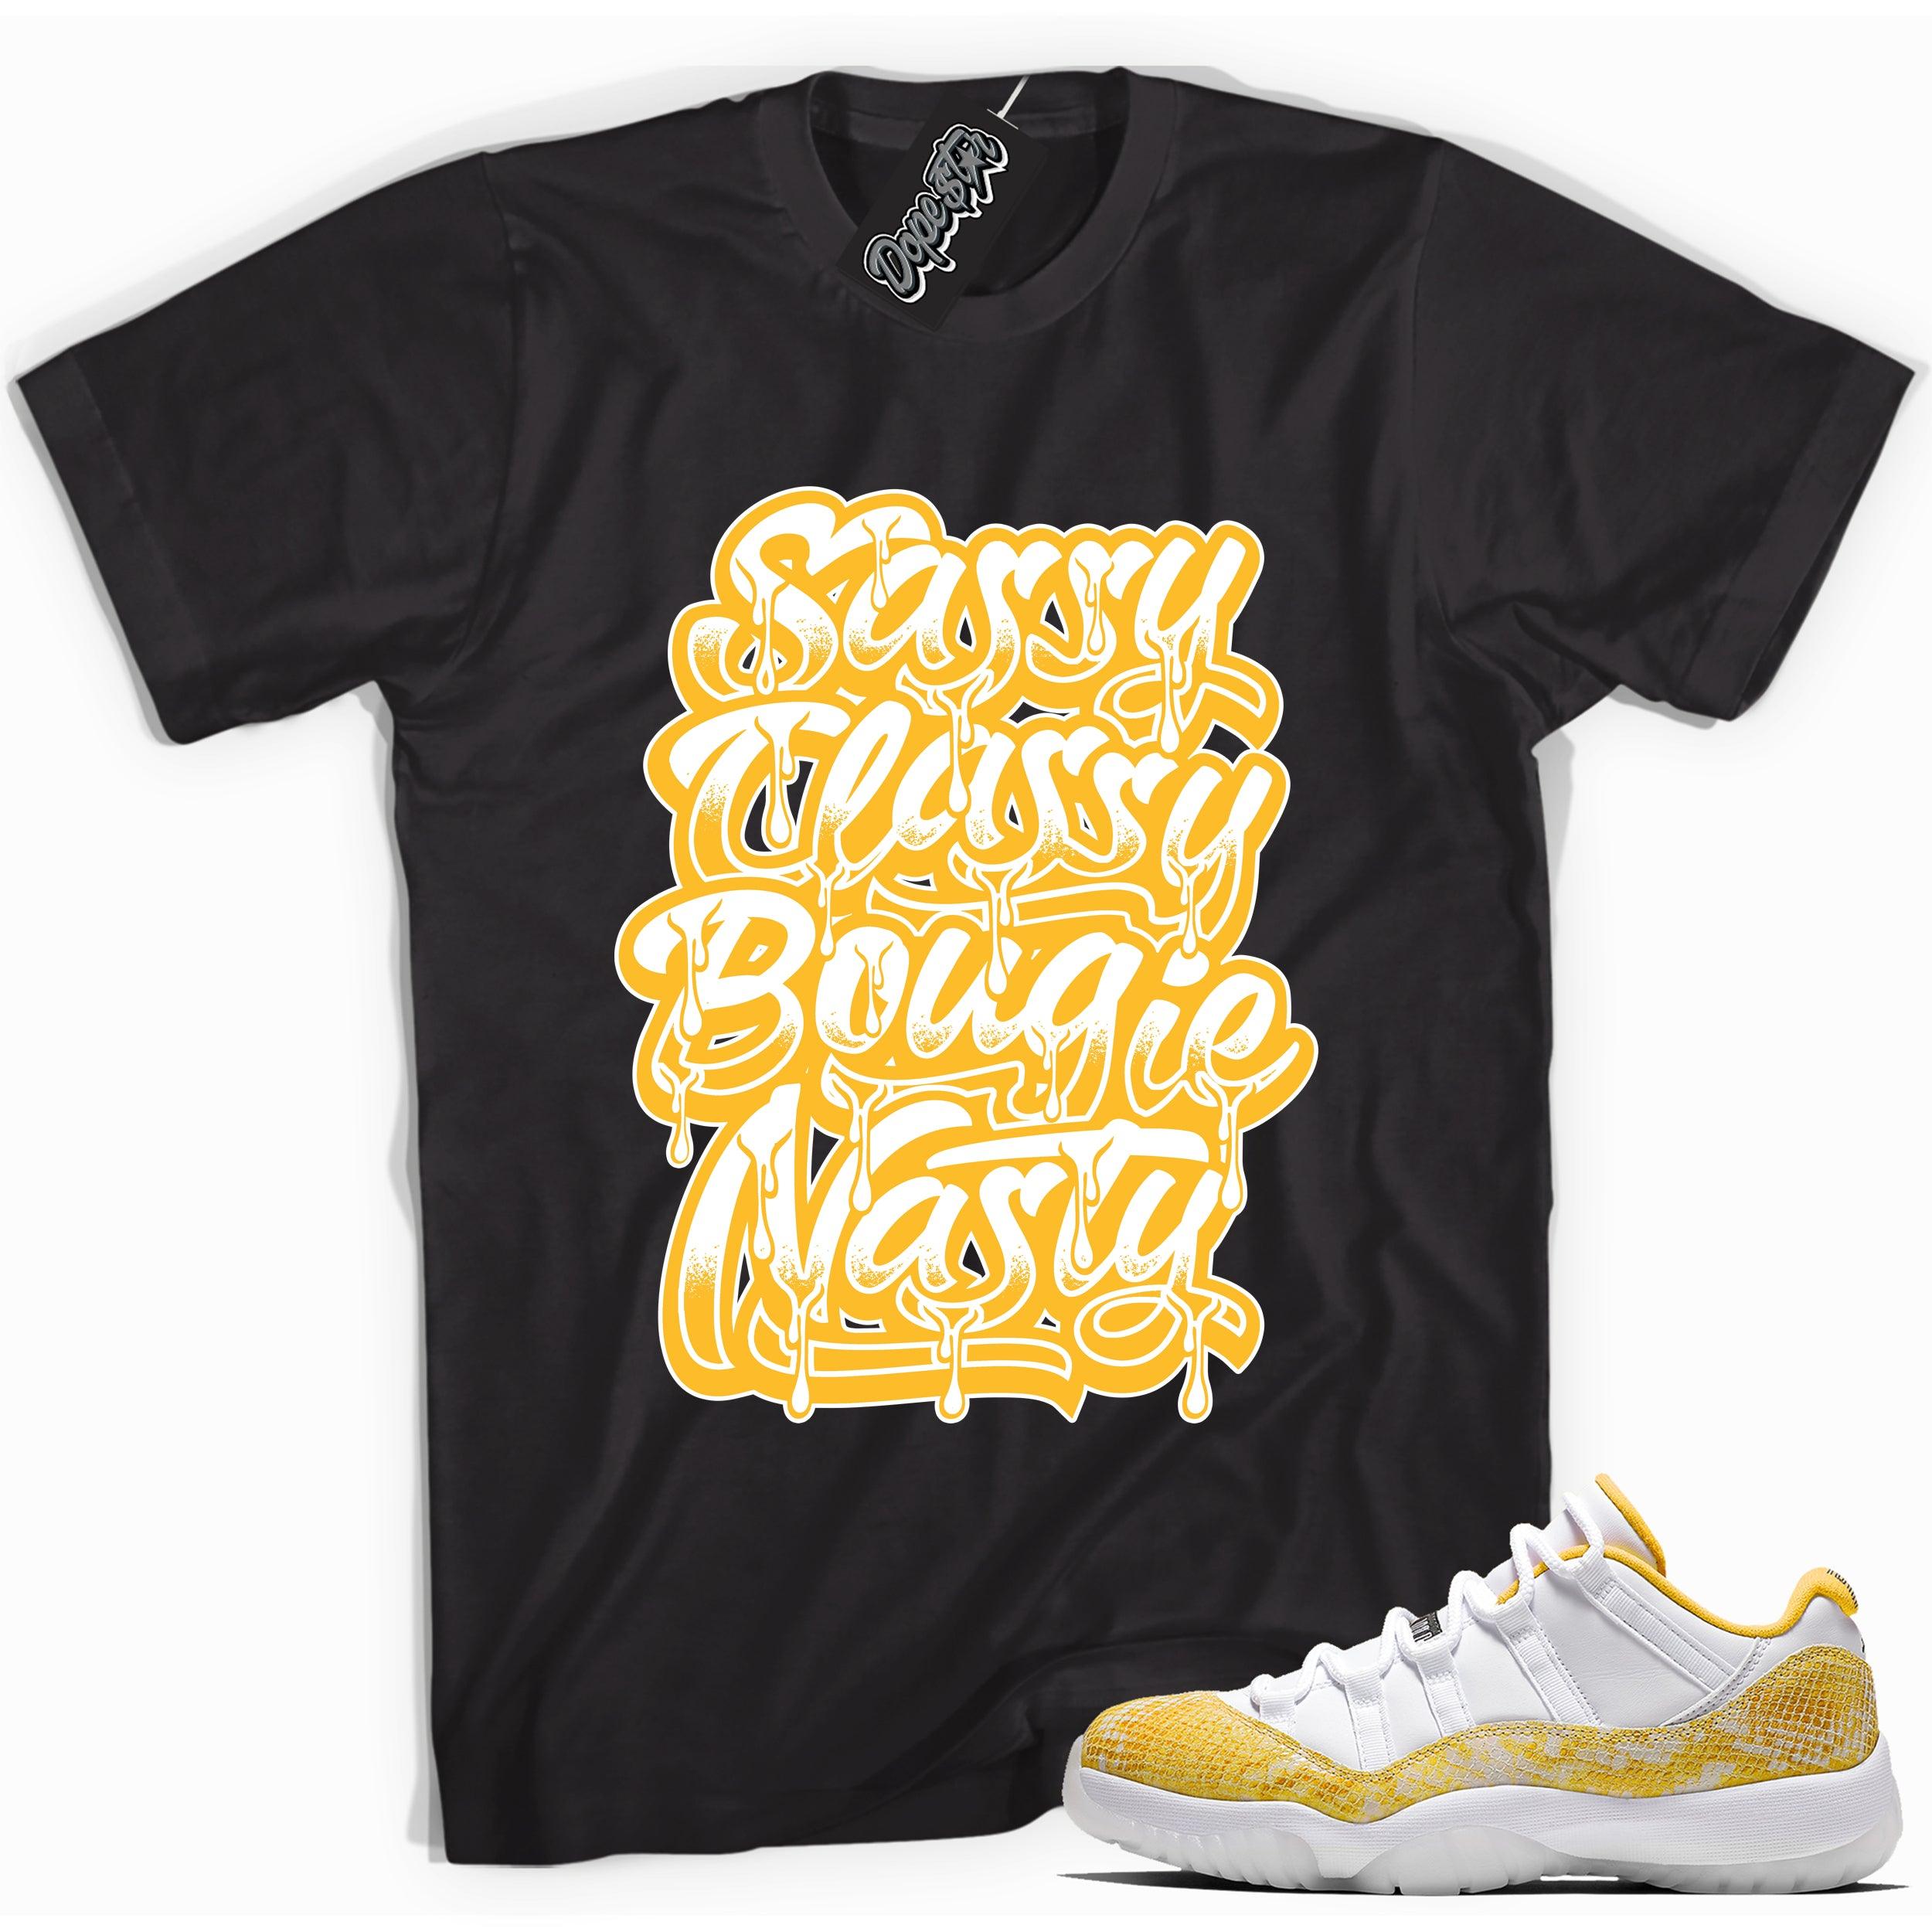 Cool black graphic tee with 'sassy classy bougie nasty' print, that perfectly matches  Air Jordan 11 Retro Low Yellow Snakeskin sneakers